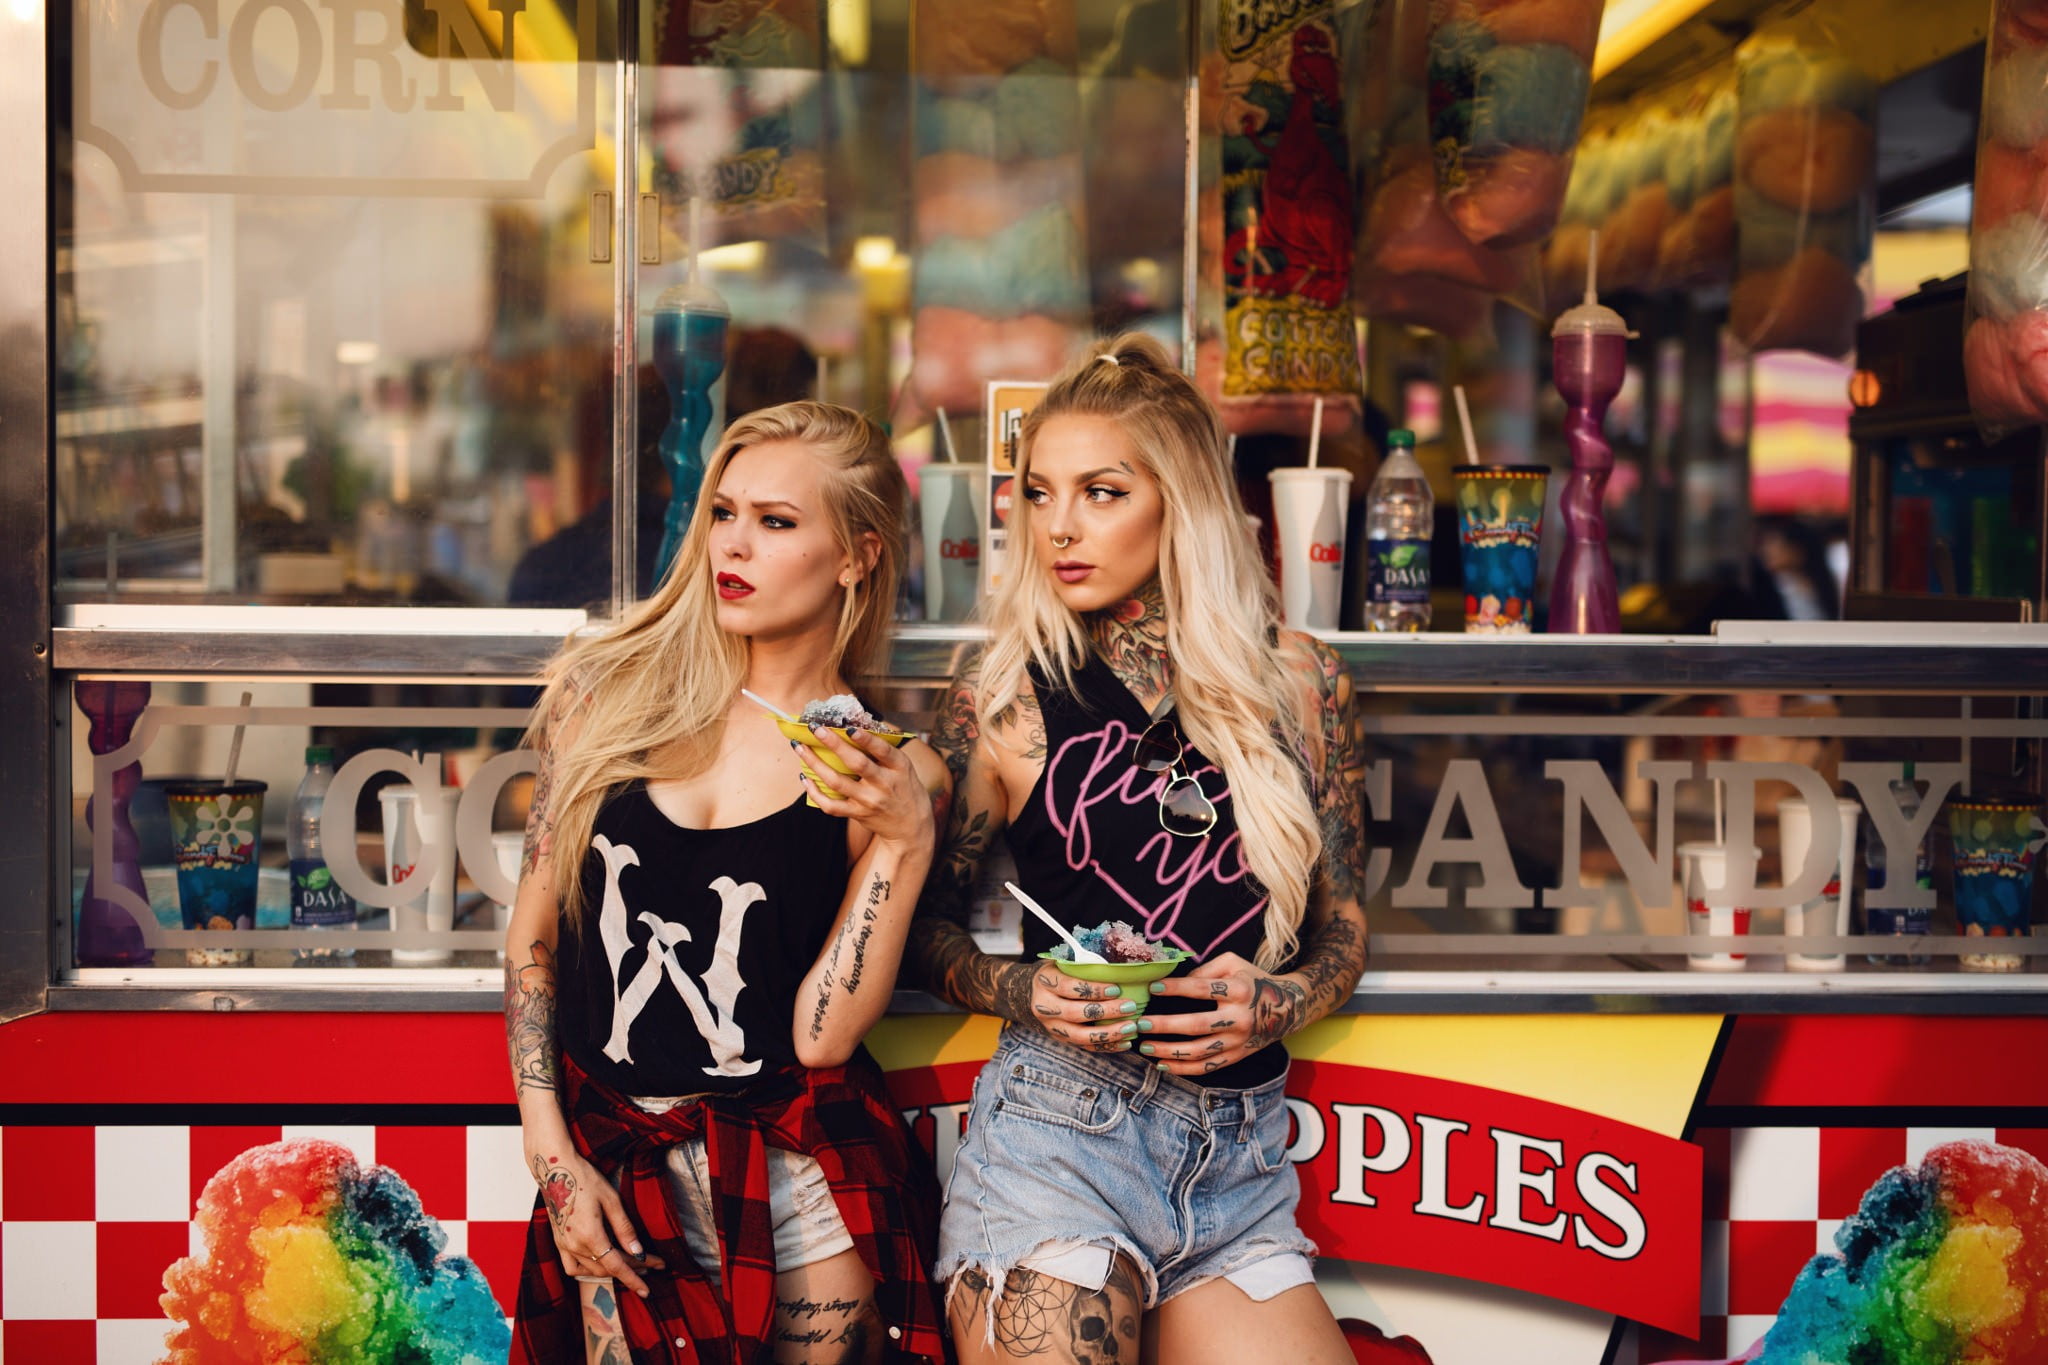 two women standing near storefront, blonde, tattoo, looking away